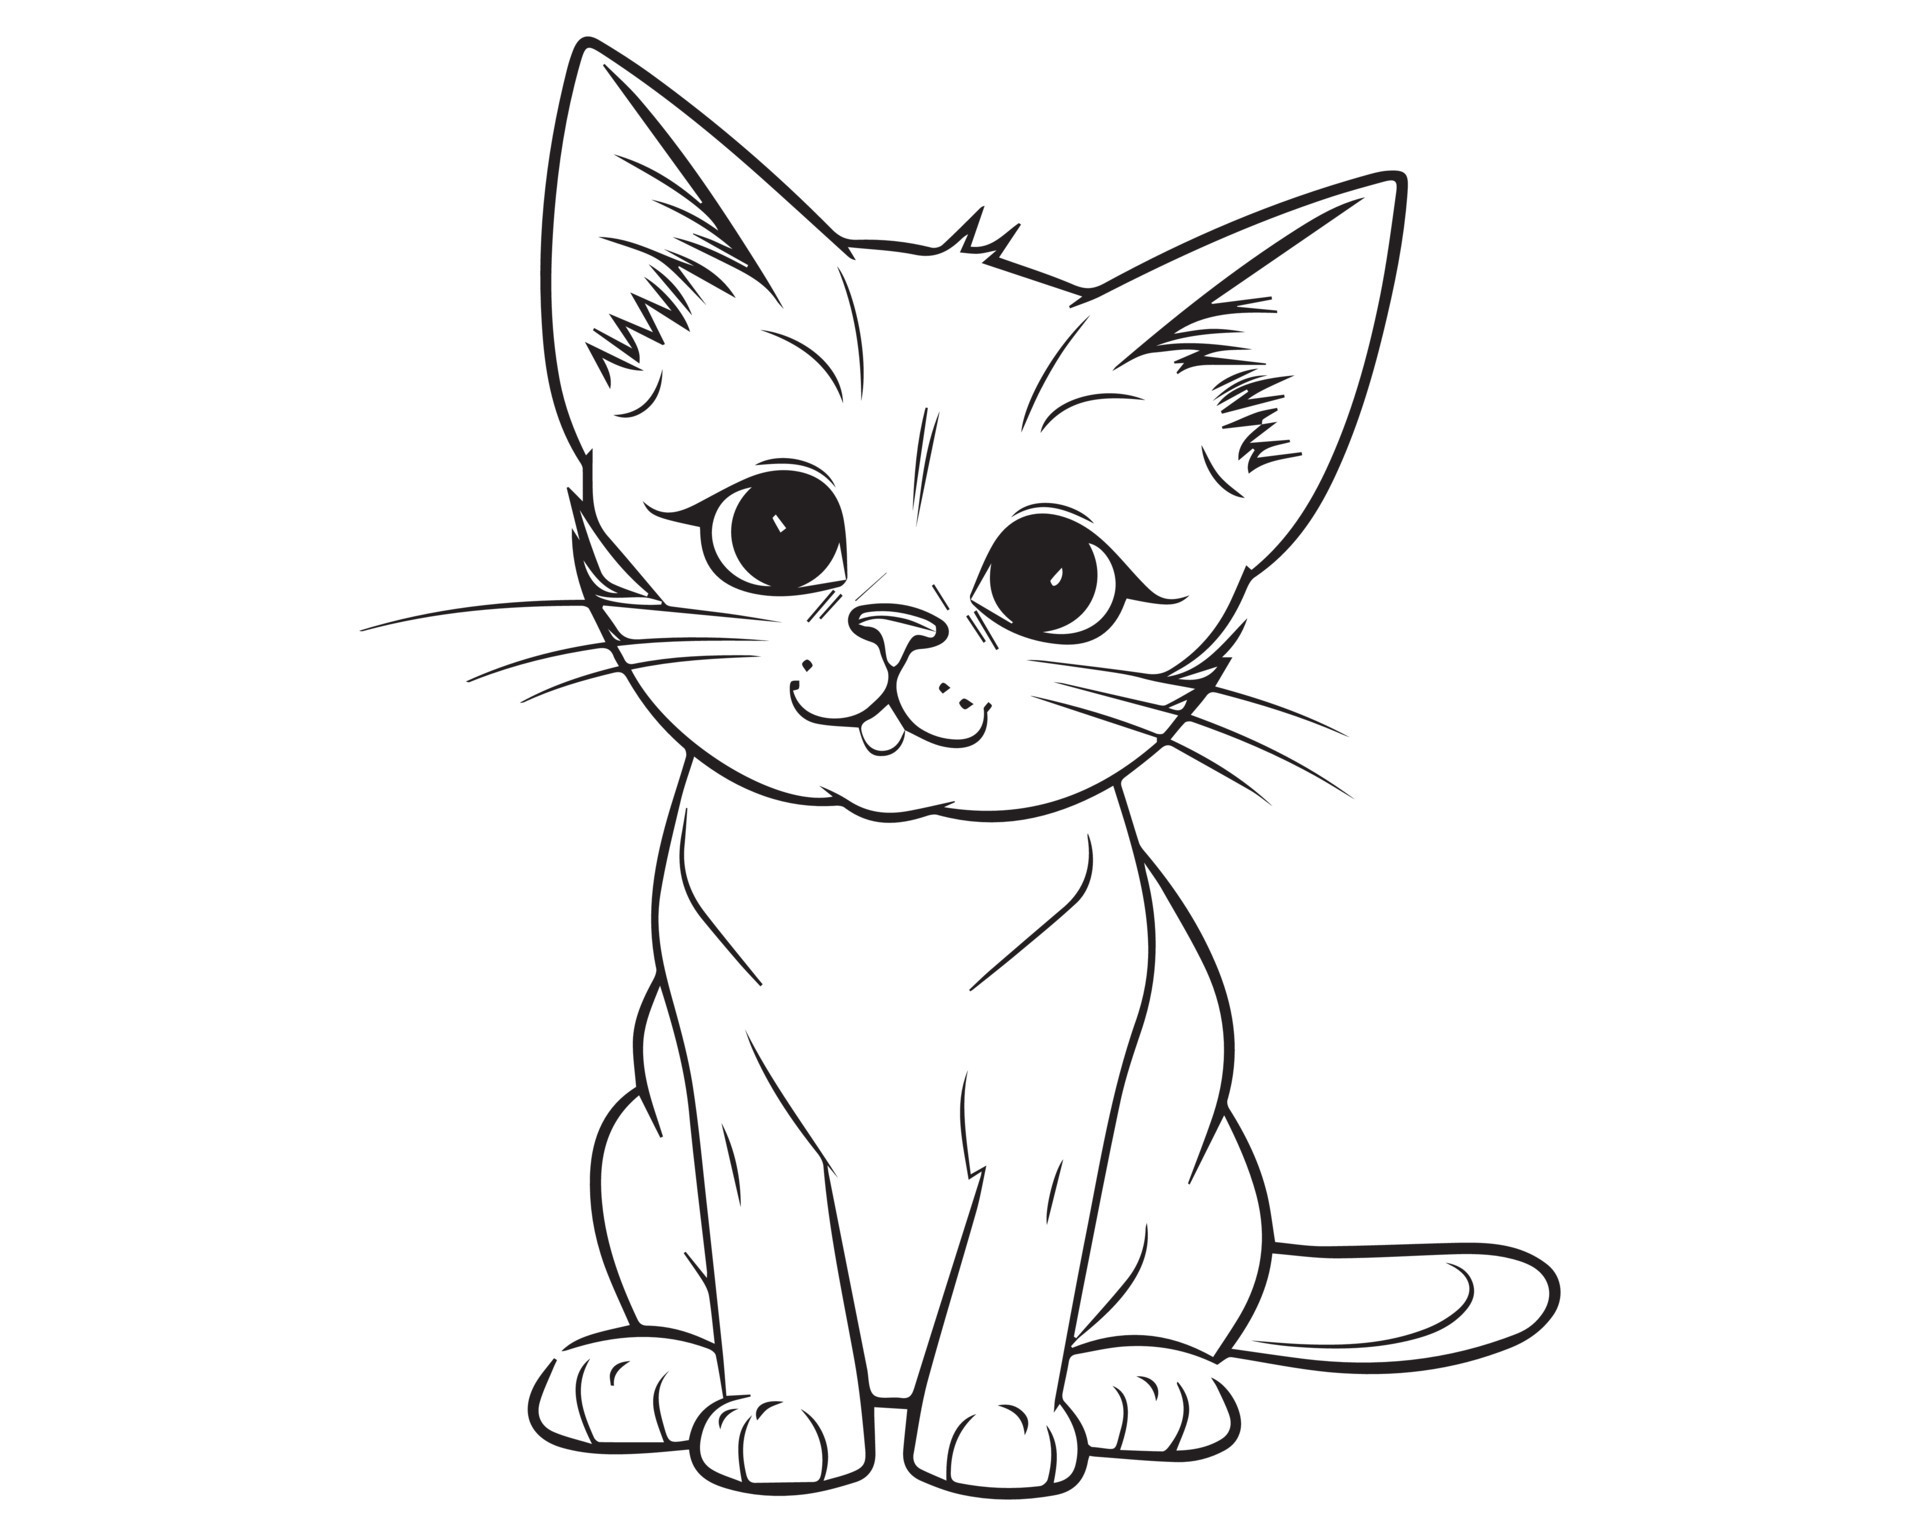 Cute kitten. Hand drawing coloring for kids and adults. Beautiful